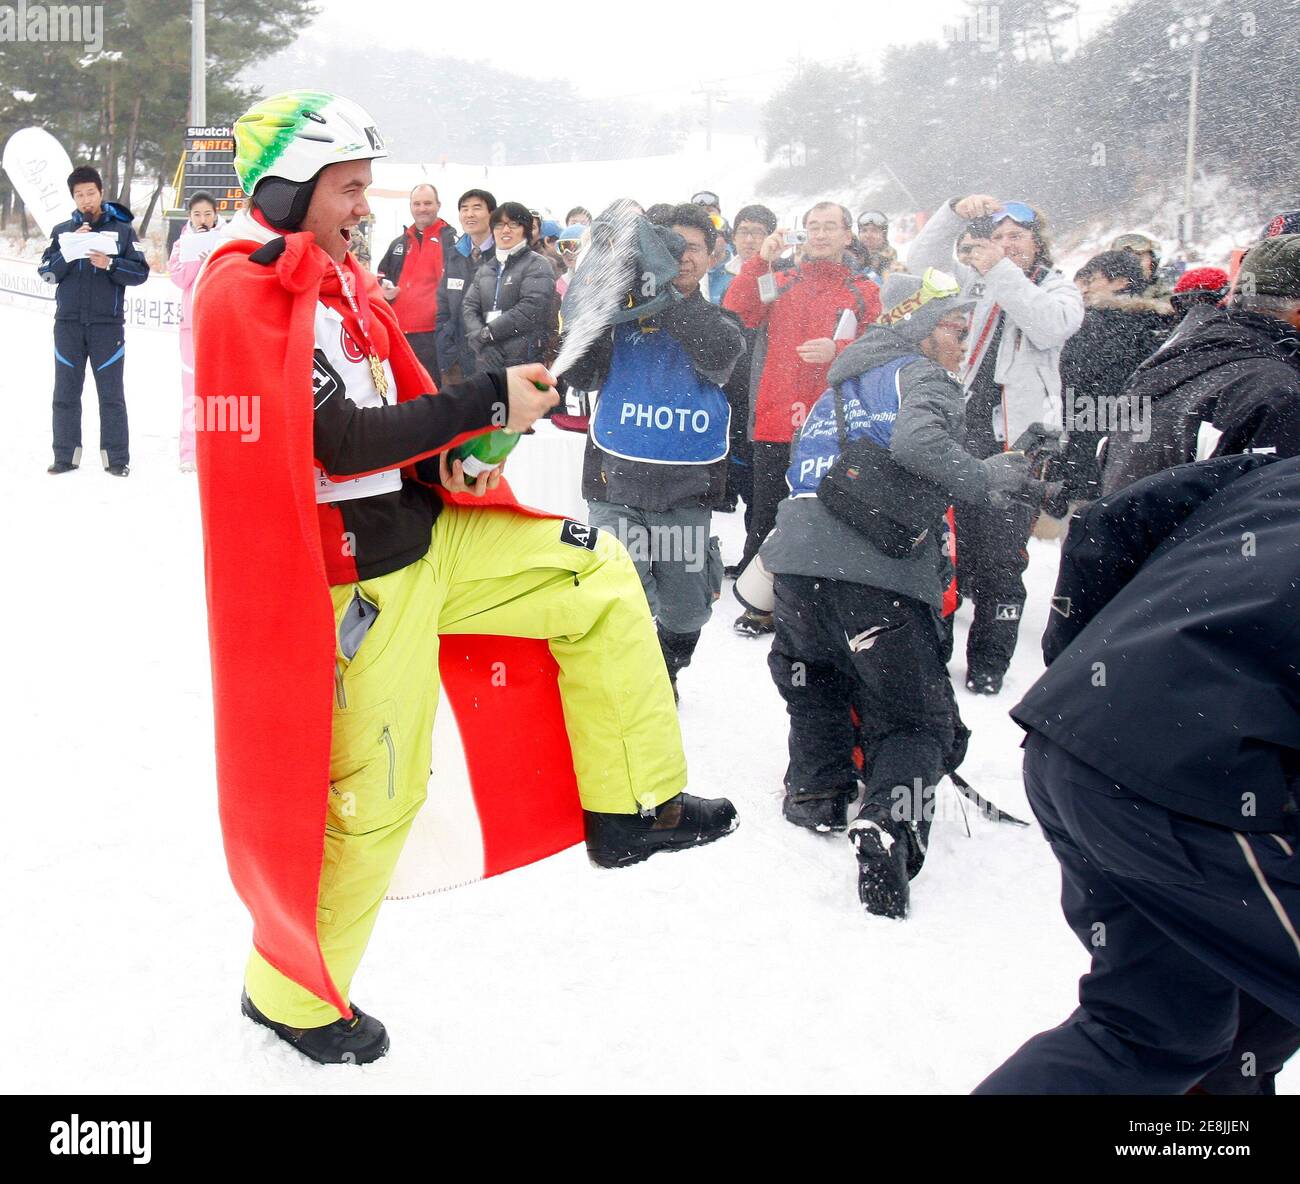 Markus Schairer (L) of Austria celebrates after winning the men's snowboard cross final at the FIS Snowboard World Championships in Hoengseong, east of Seoul, January 18, 2009.     REUTERS/Jo Yong-Hak  (SOUTH KOREA) Stock Photo